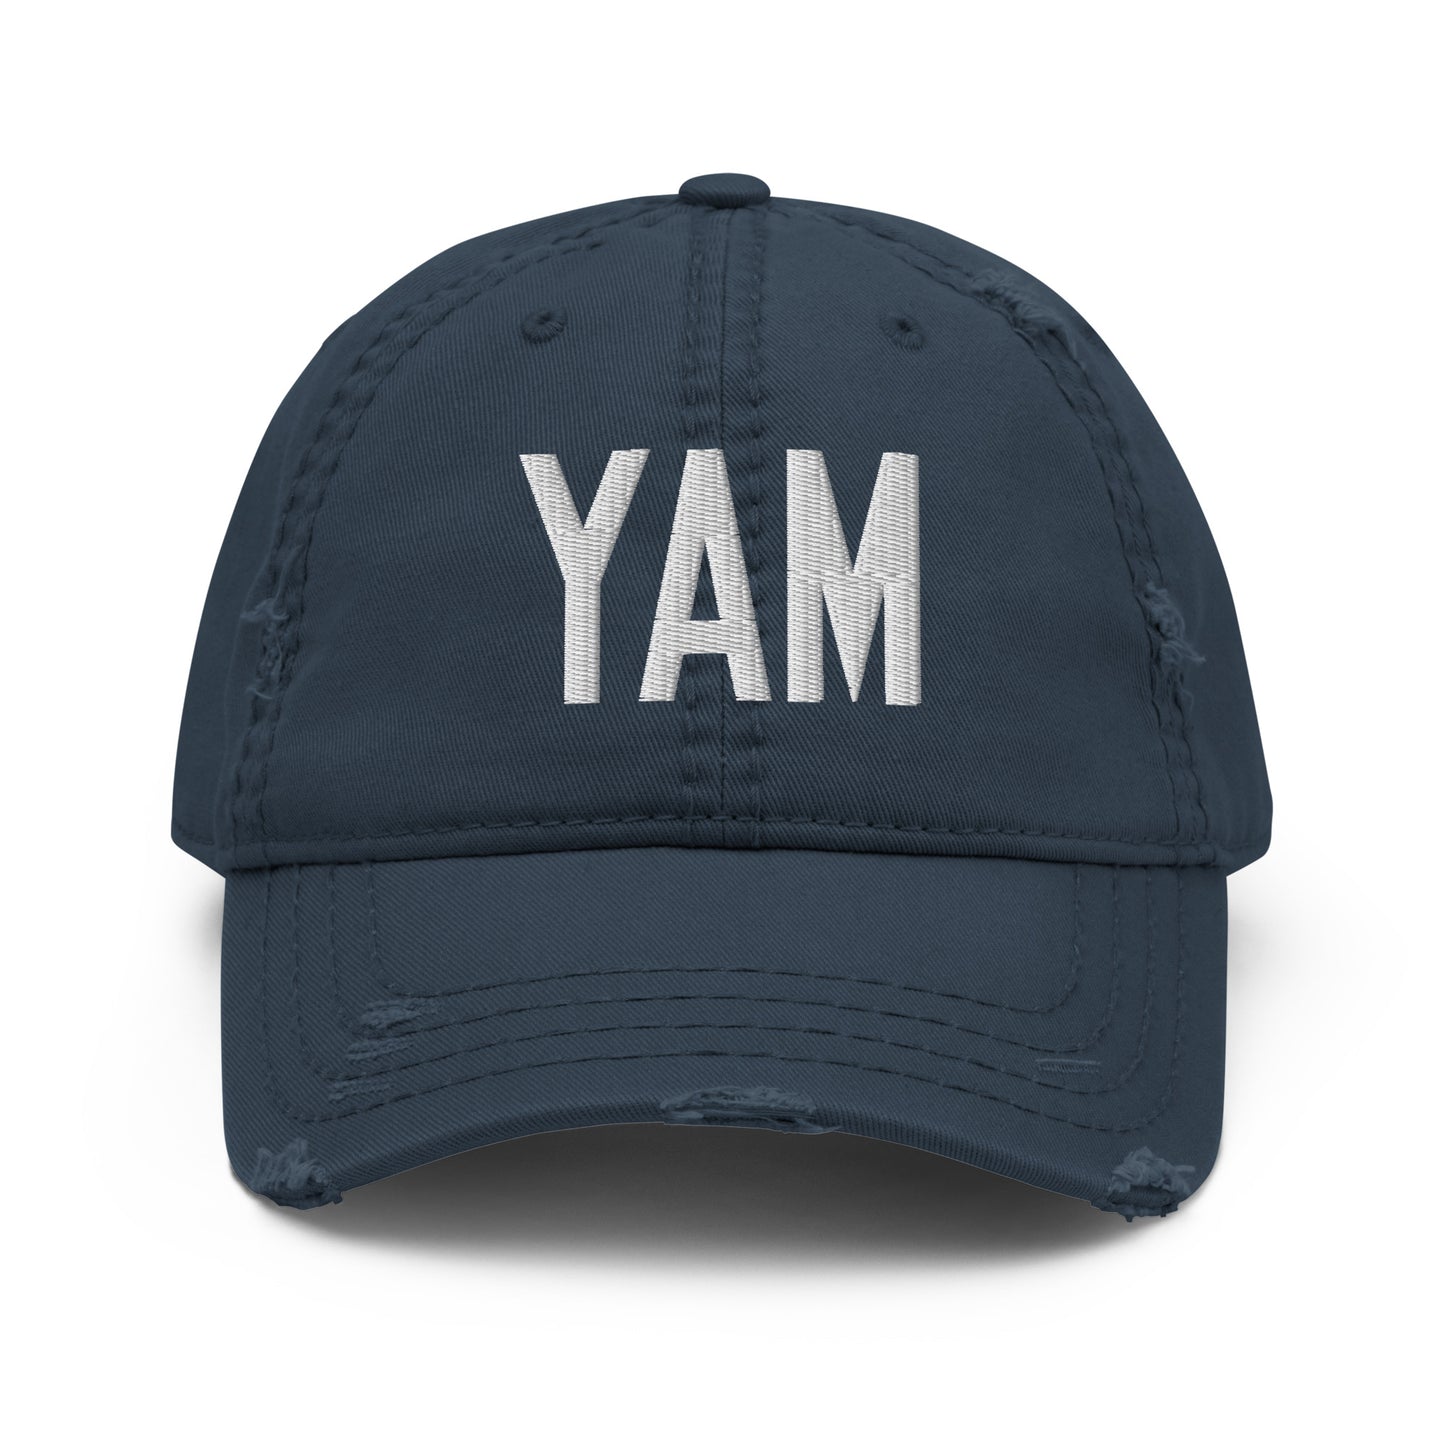 Airport Code Distressed Hat - White • YAM Sault-Ste-Marie • YHM Designs - Image 13